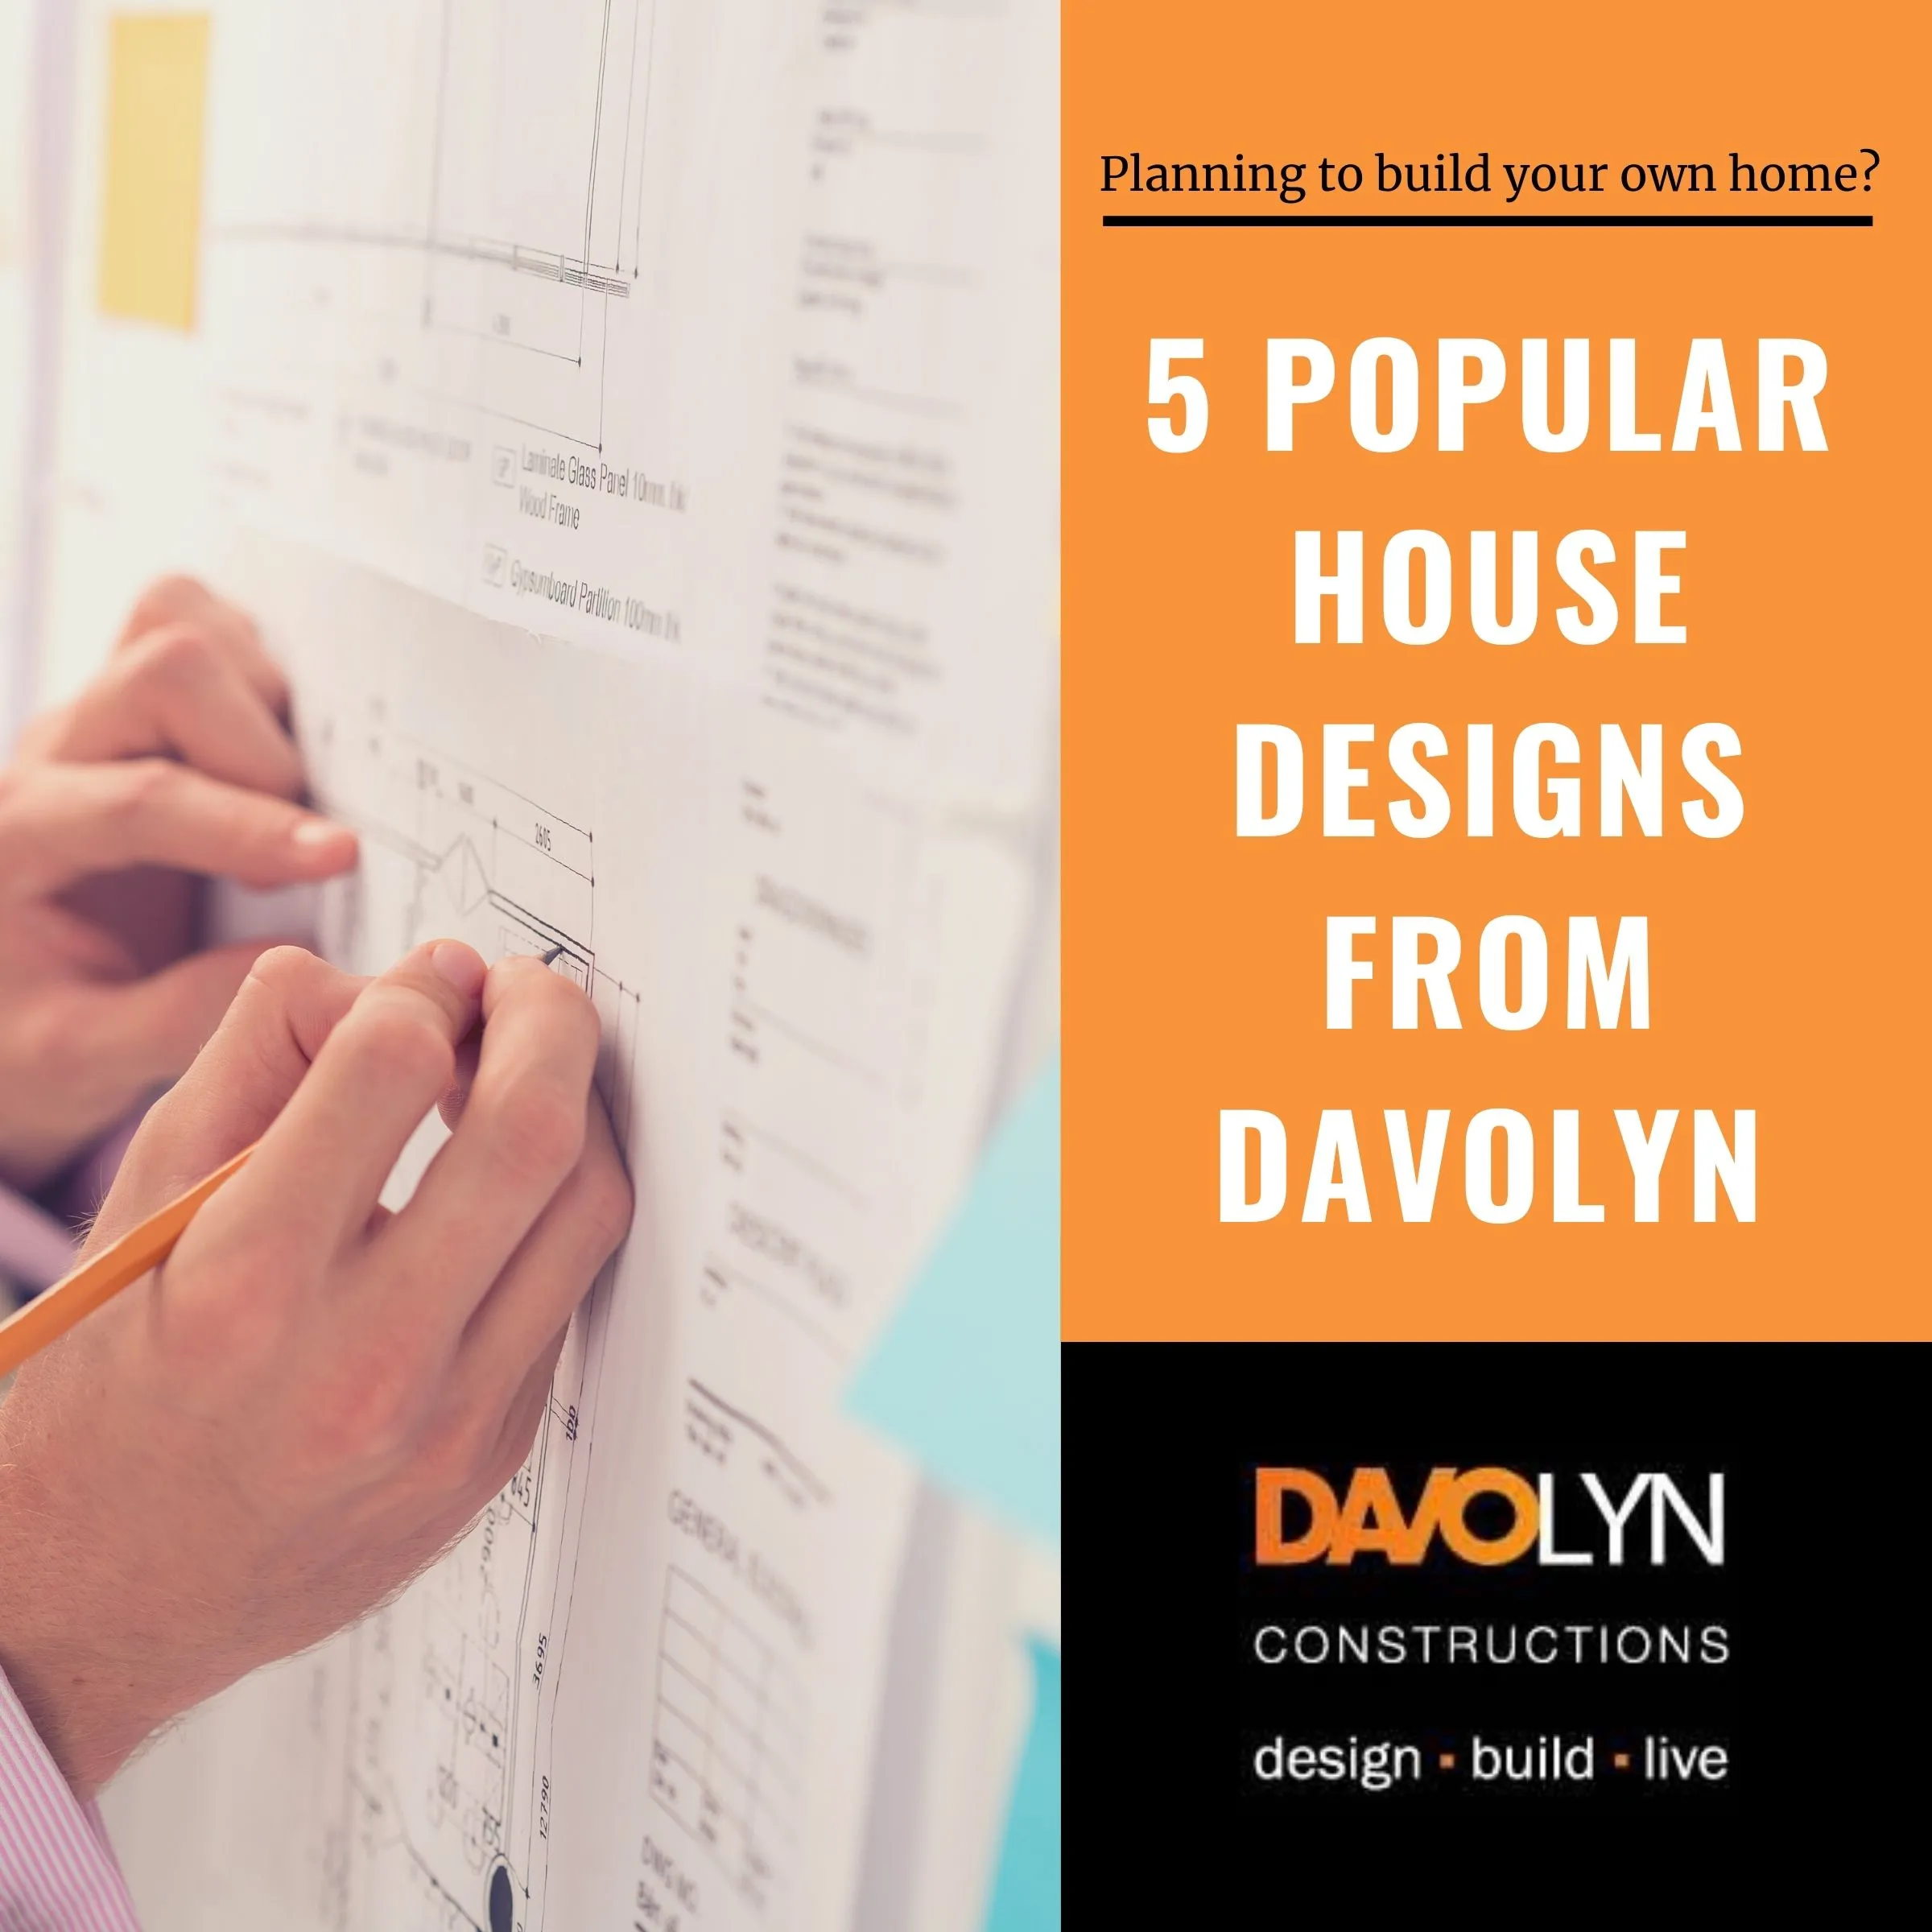 5 Popular House Designs from Davolyn